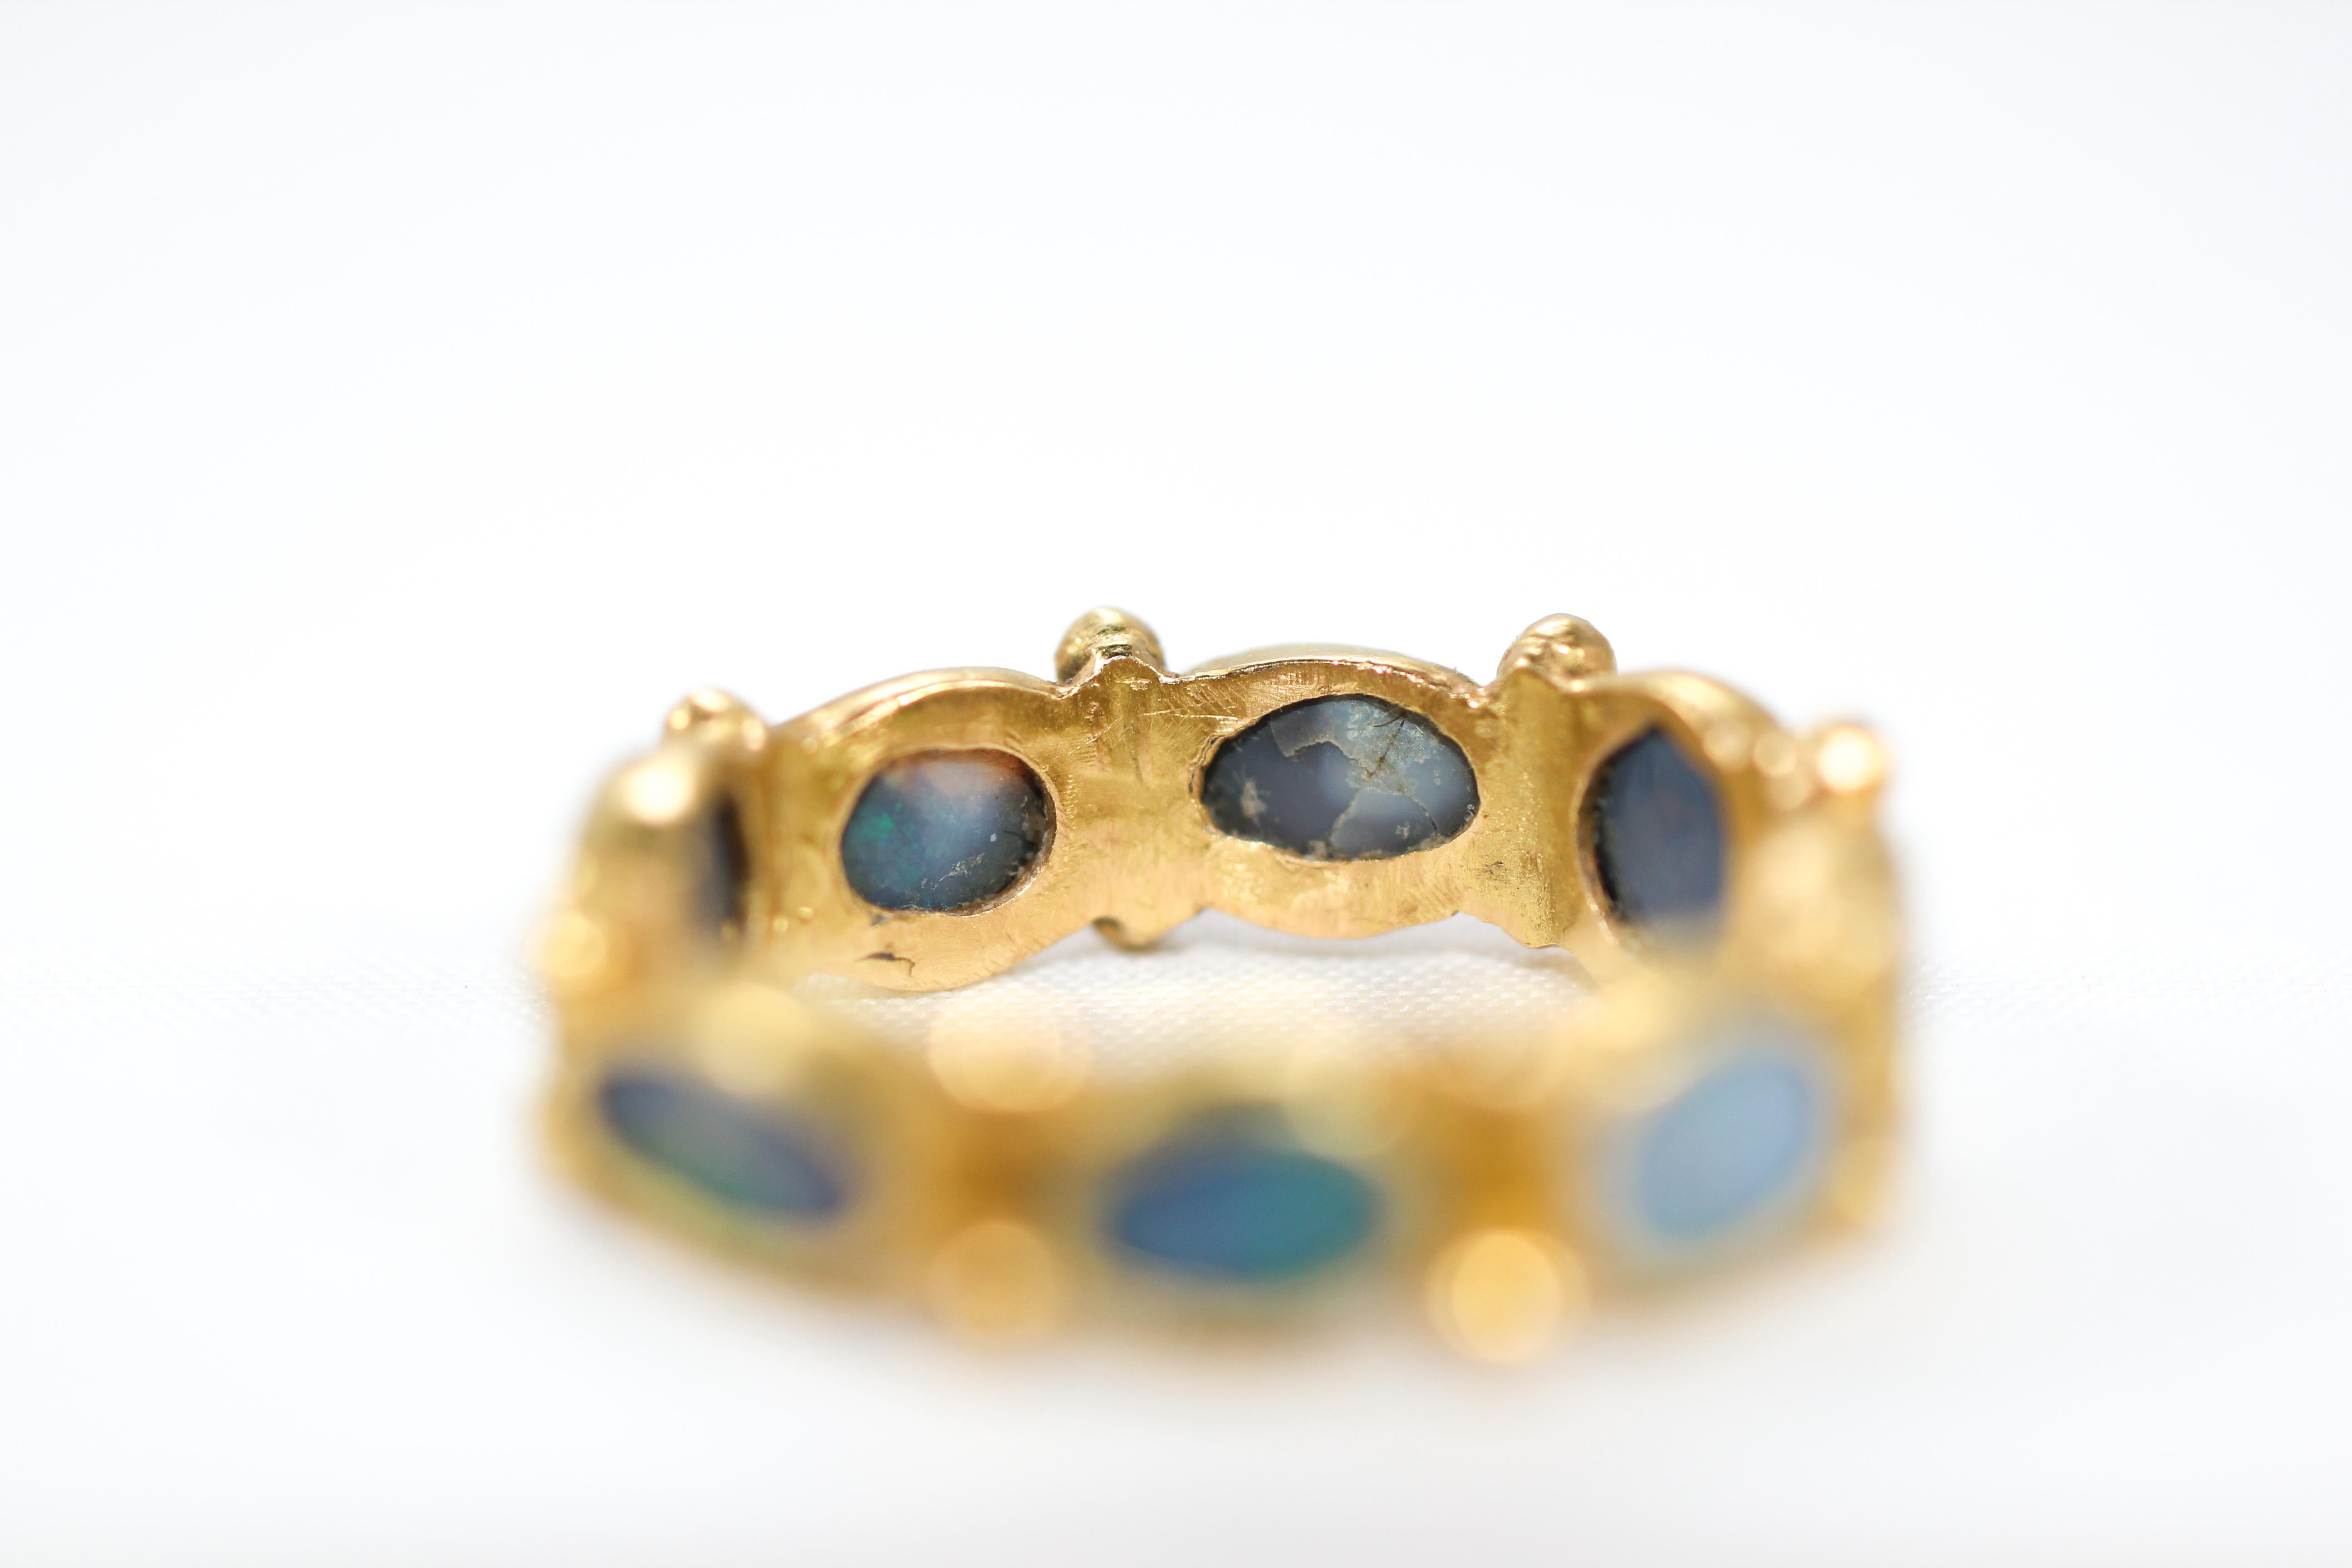 Contemporary Black Opal 22 Karat Gold Bezel Band Fashion Ring One of a Kind Handmade Jewelry For Sale